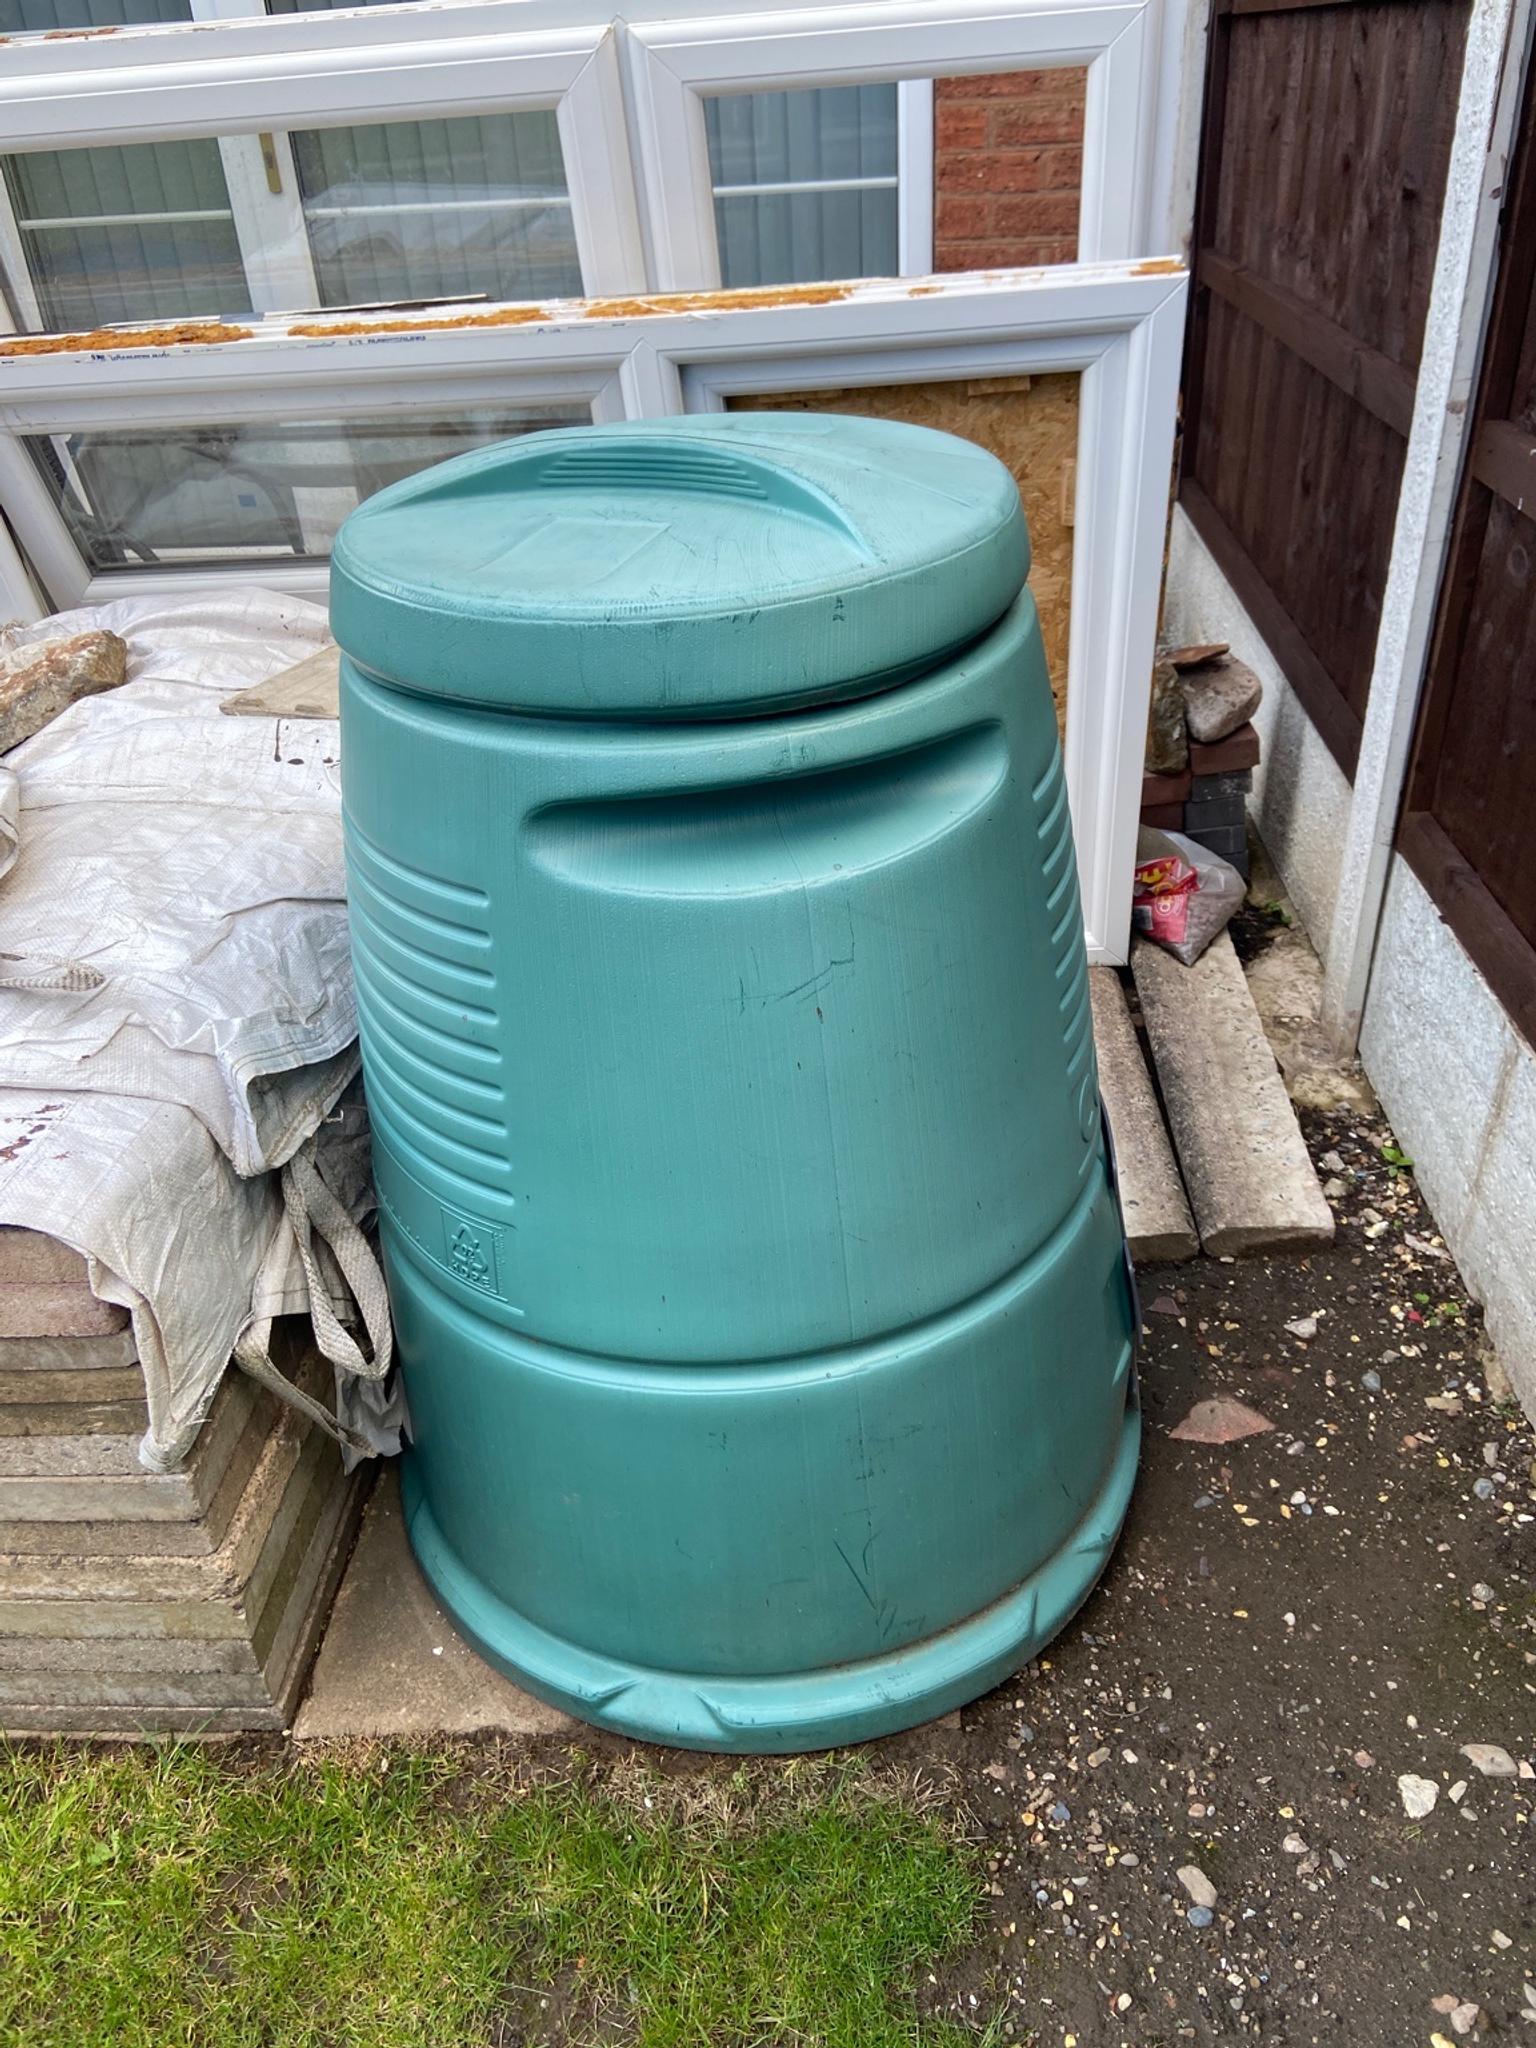 Large green compost bin in WV6 Wolverhampton for £4.00 for sale | Shpock